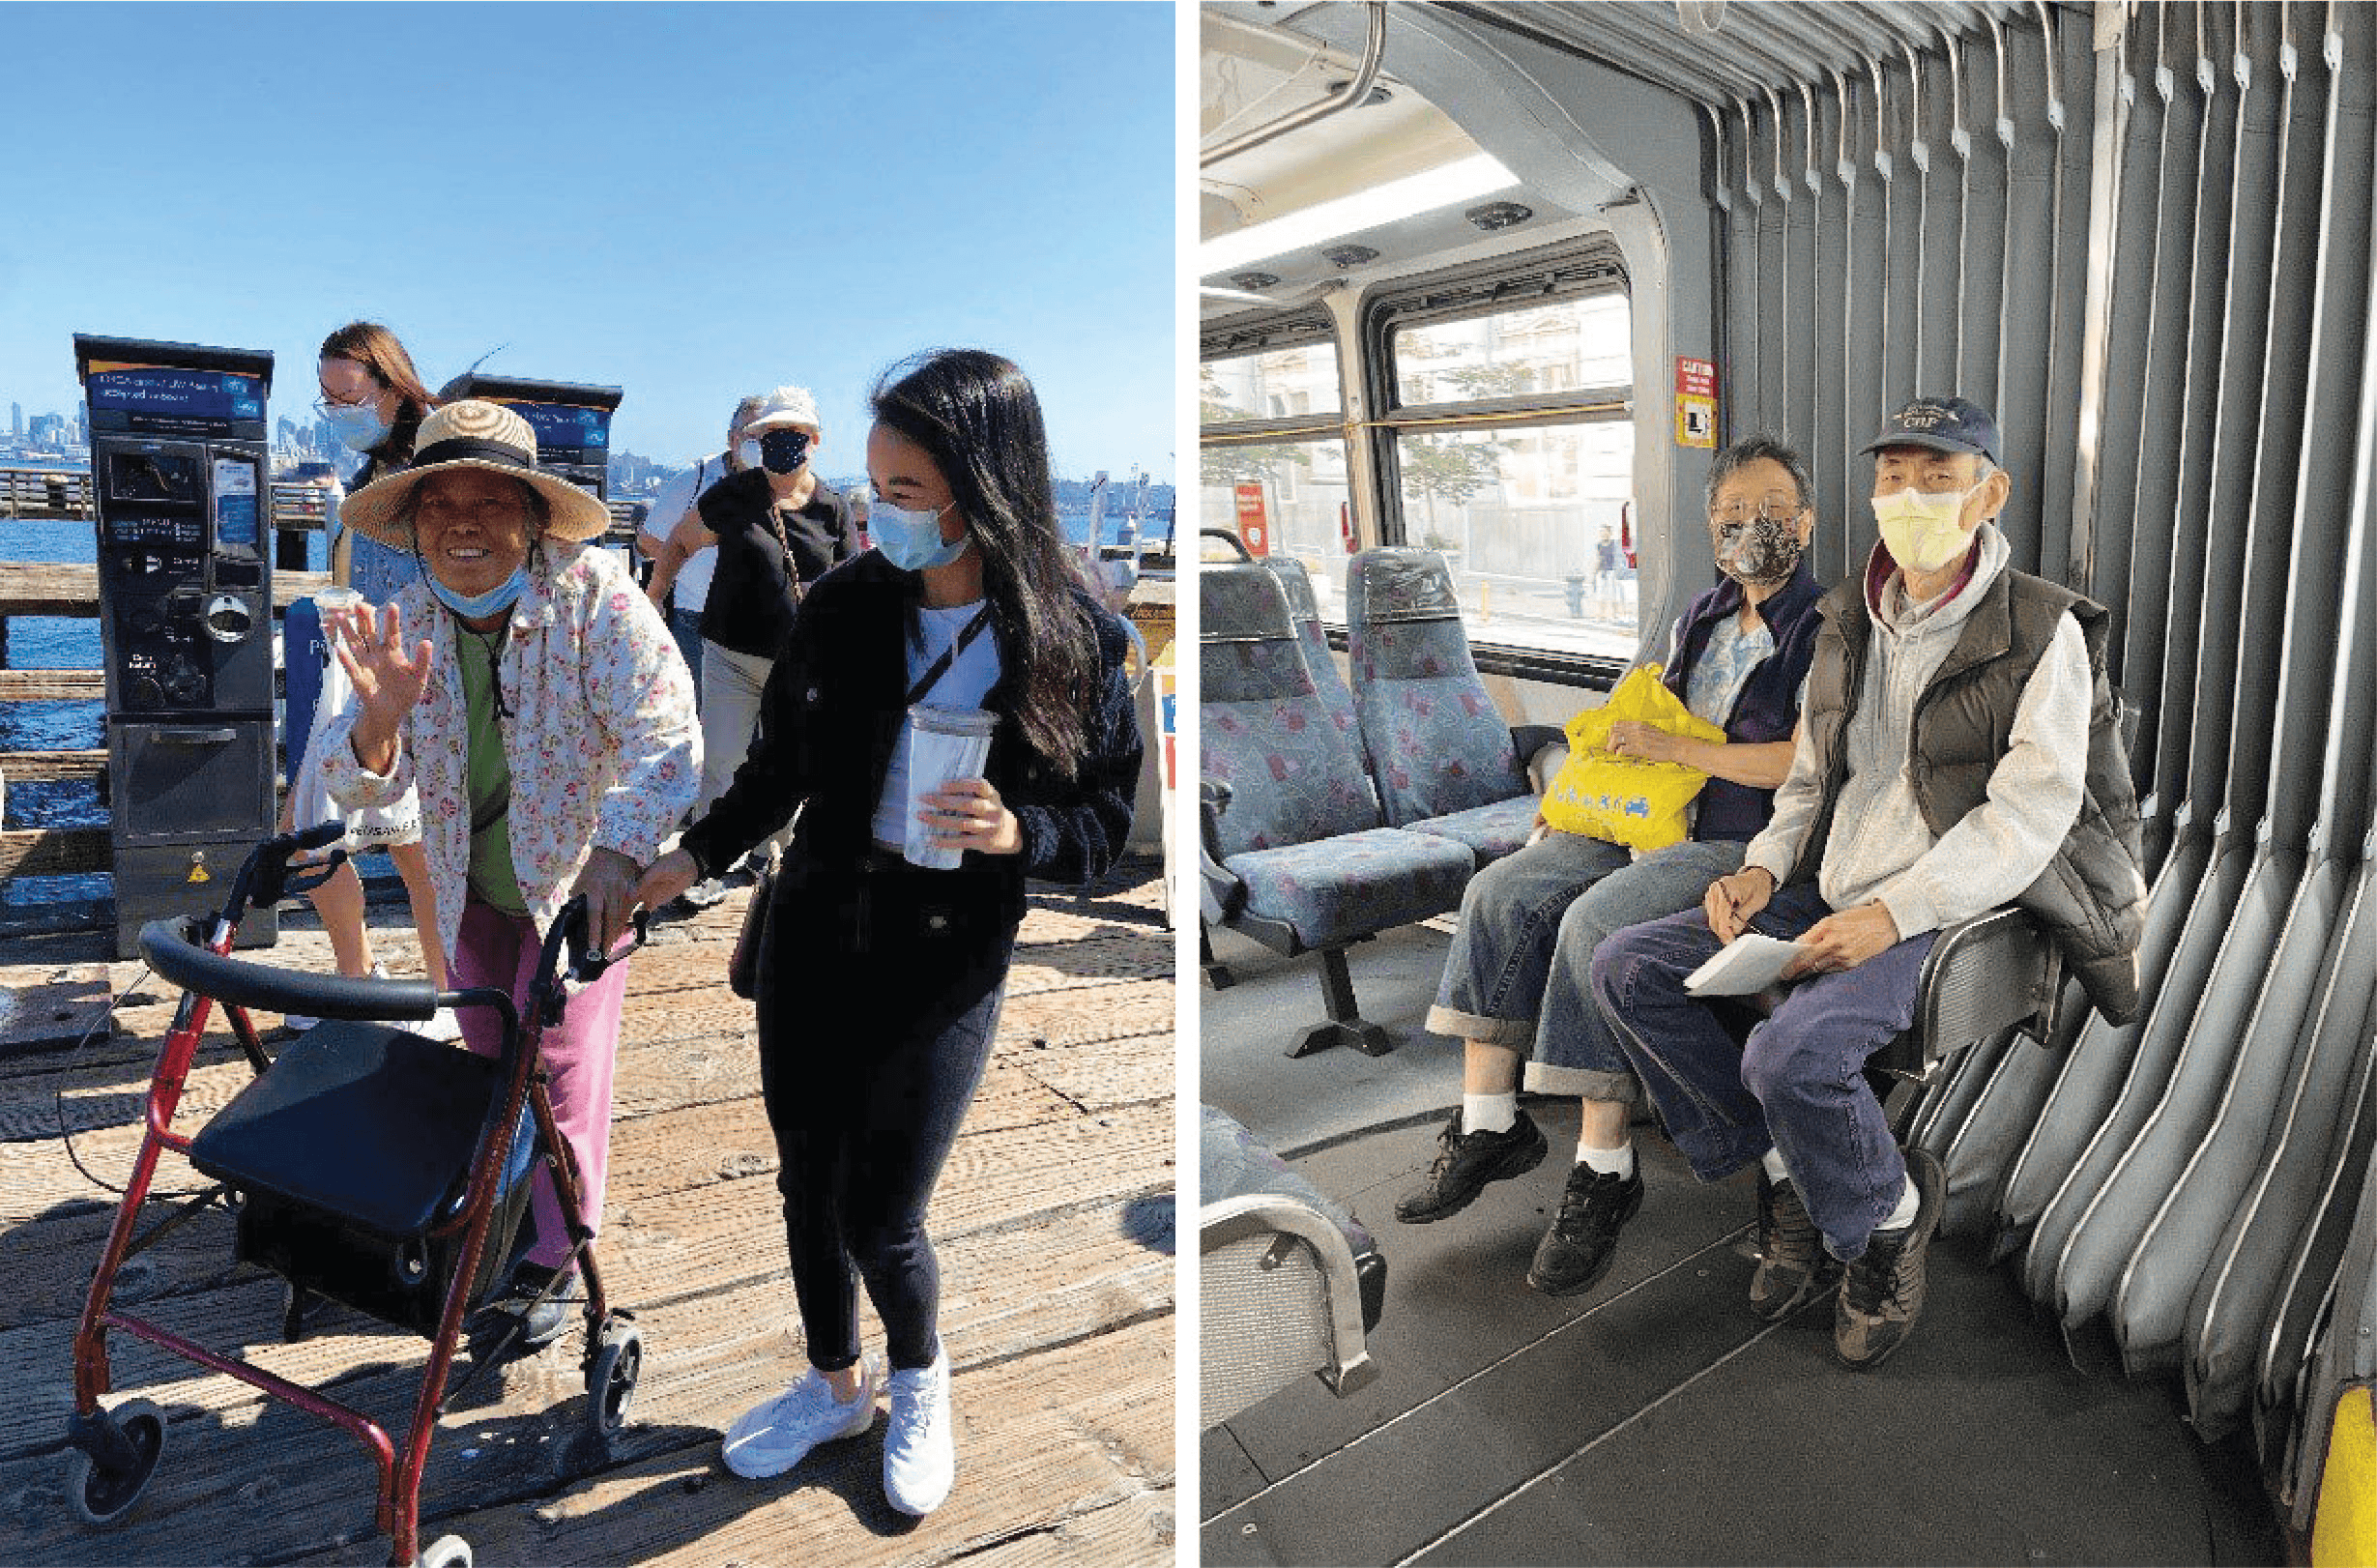 Seattle community members enjoy a sunny day in the Alki neighborhood of West Seattle (left) and a ride on the bus (right) during their transit field trips in 2021.